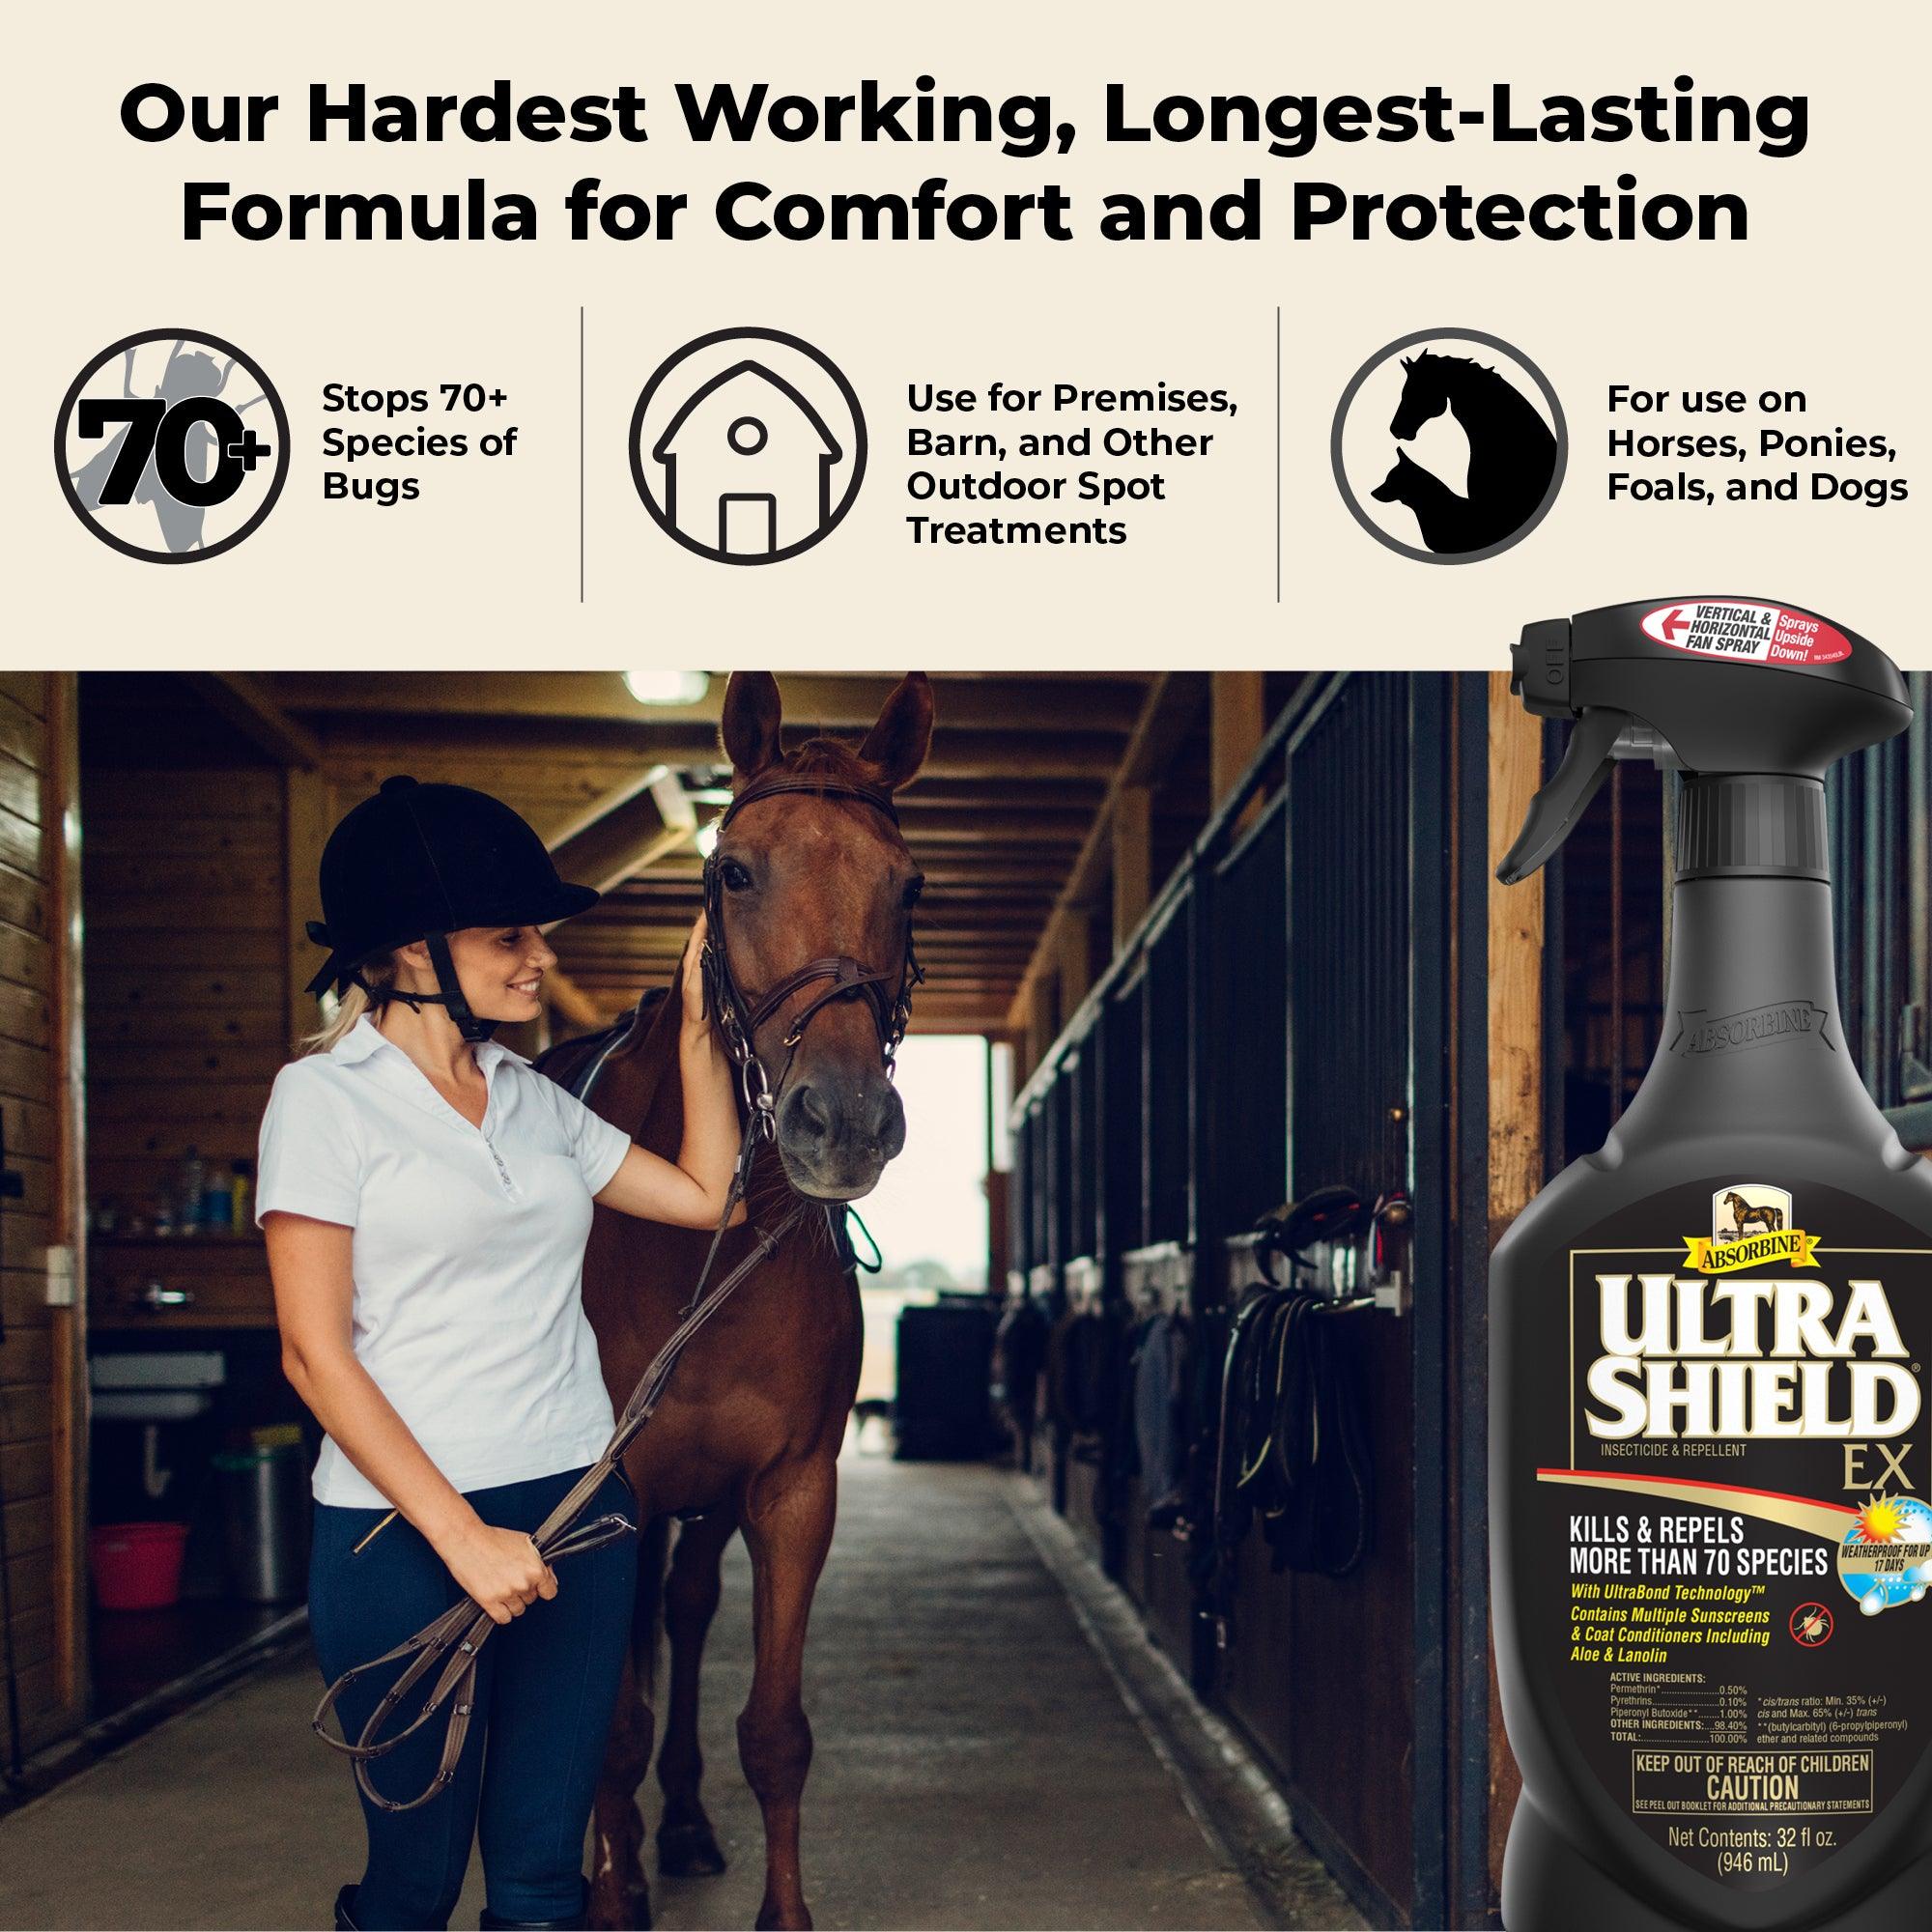 Woman in a white polo jersey walking her horse out of the stable. UltraShield EX "Our hardest working, longest-lasting formula for comfort and protection.